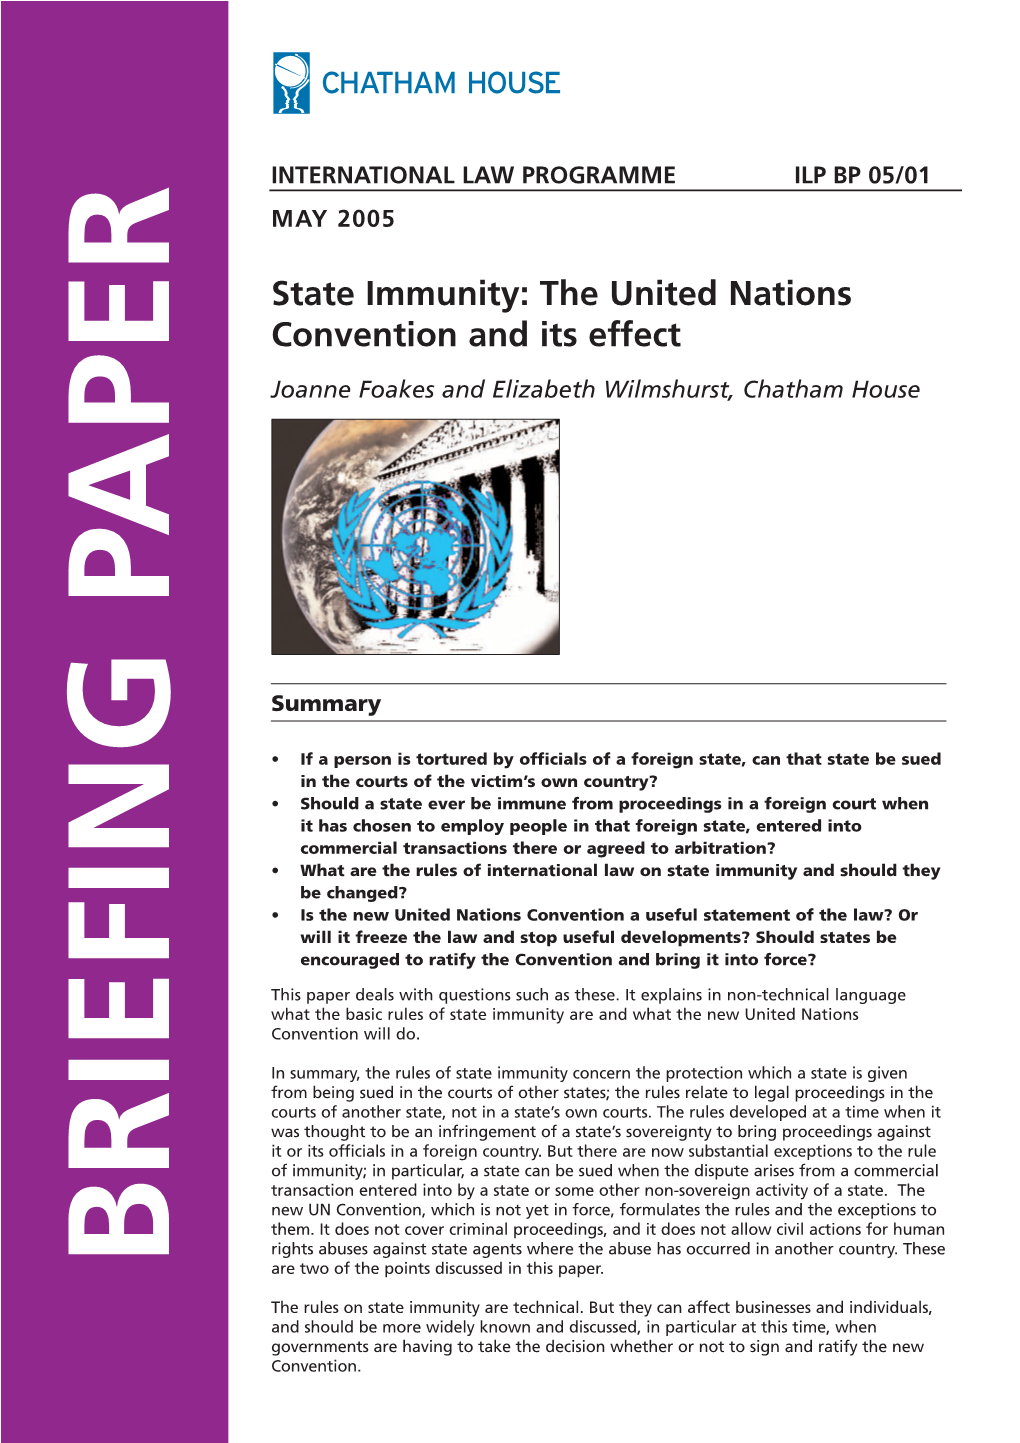 State Immunity: the United Nations Convention and Its Effect